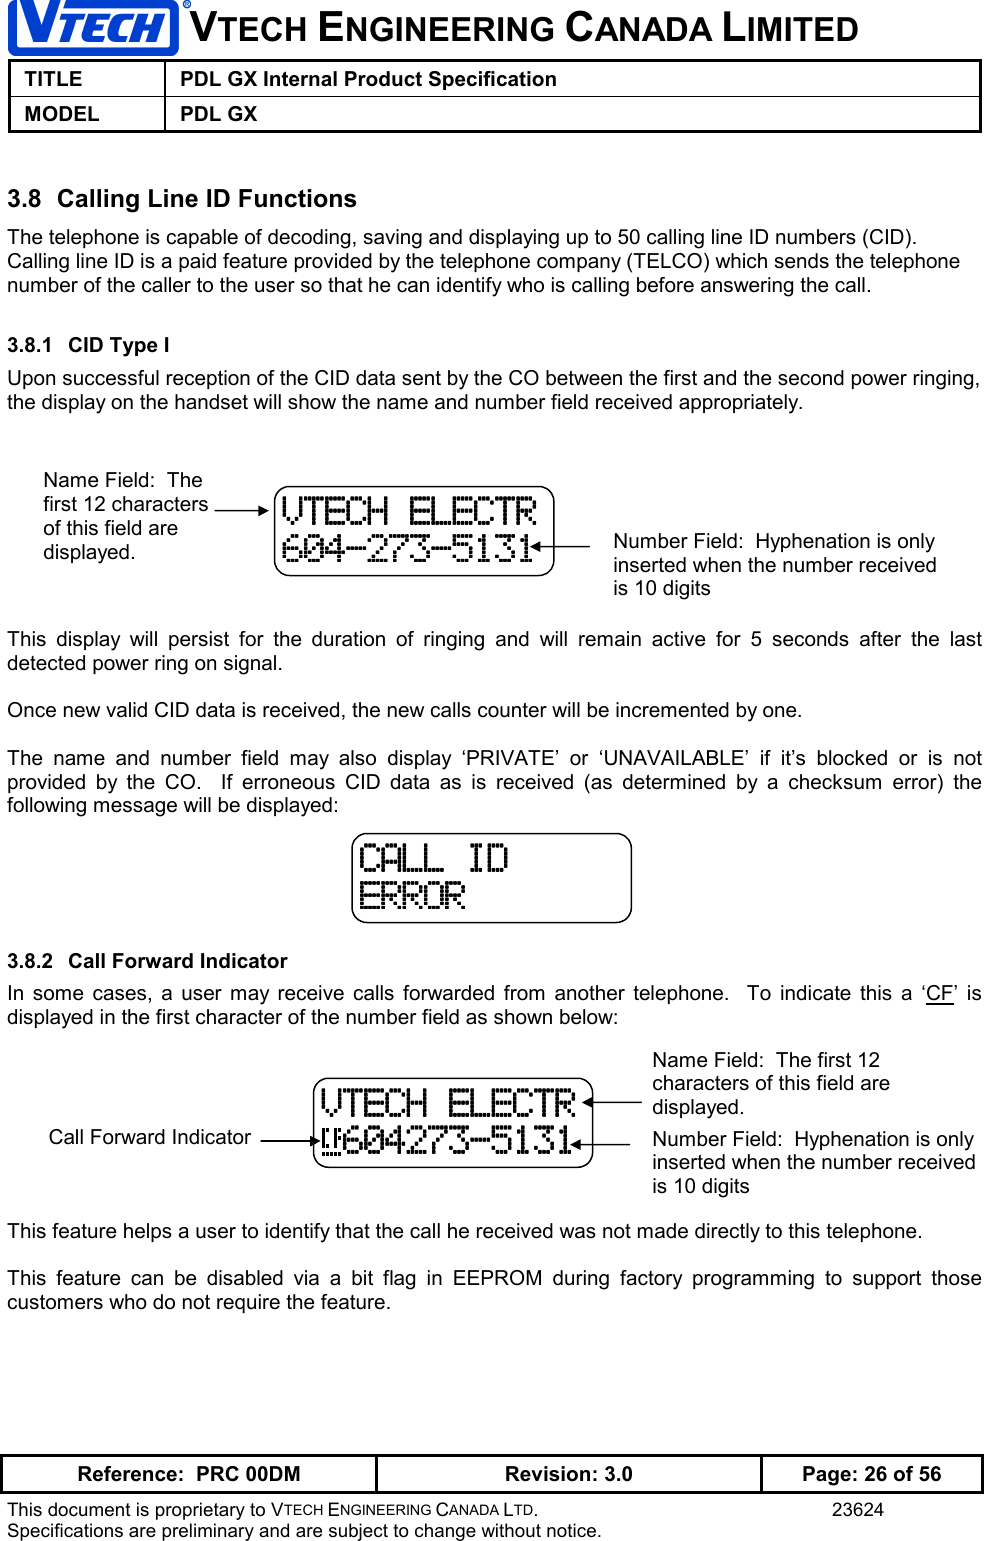 VTECH ENGINEERING CANADA LIMITEDTITLE PDL GX Internal Product SpecificationMODEL PDL GXReference:  PRC 00DM Revision: 3.0 Page: 26 of 56This document is proprietary to VTECH ENGINEERING CANADA LTD. 23624Specifications are preliminary and are subject to change without notice.3.8  Calling Line ID FunctionsThe telephone is capable of decoding, saving and displaying up to 50 calling line ID numbers (CID).Calling line ID is a paid feature provided by the telephone company (TELCO) which sends the telephonenumber of the caller to the user so that he can identify who is calling before answering the call.3.8.1  CID Type IUpon successful reception of the CID data sent by the CO between the first and the second power ringing,the display on the handset will show the name and number field received appropriately.This display will persist for the duration of ringing and will remain active for 5 seconds after the lastdetected power ring on signal.Once new valid CID data is received, the new calls counter will be incremented by one.The name and number field may also display ‘PRIVATE’ or ‘UNAVAILABLE’ if it’s blocked or is notprovided by the CO.  If erroneous CID data as is received (as determined by a checksum error) thefollowing message will be displayed:3.8.2  Call Forward IndicatorIn some cases, a user may receive calls forwarded from another telephone.  To indicate this a ‘CF’ isdisplayed in the first character of the number field as shown below:This feature helps a user to identify that the call he received was not made directly to this telephone.This feature can be disabled via a bit flag in EEPROM during factory programming to support thosecustomers who do not require the feature.VTECH ELECTRVTECH ELECTRVTECH ELECTRVTECH ELECTR604-273-5131604-273-5131604-273-5131604-273-5131Name Field:  Thefirst 12 charactersof this field aredisplayed. Number Field:  Hyphenation is onlyinserted when the number receivedis 10 digitsCALL IDCALL IDCALL IDCALL IDERRORERRORERRORERRORName Field:  The first 12characters of this field aredisplayed.VTECH ELECTRVTECH ELECTRVTECH ELECTRVTECH ELECTR 604273-5131 604273-5131 604273-5131 604273-5131 Number Field:  Hyphenation is onlyinserted when the number receivedis 10 digitsCall Forward Indicator